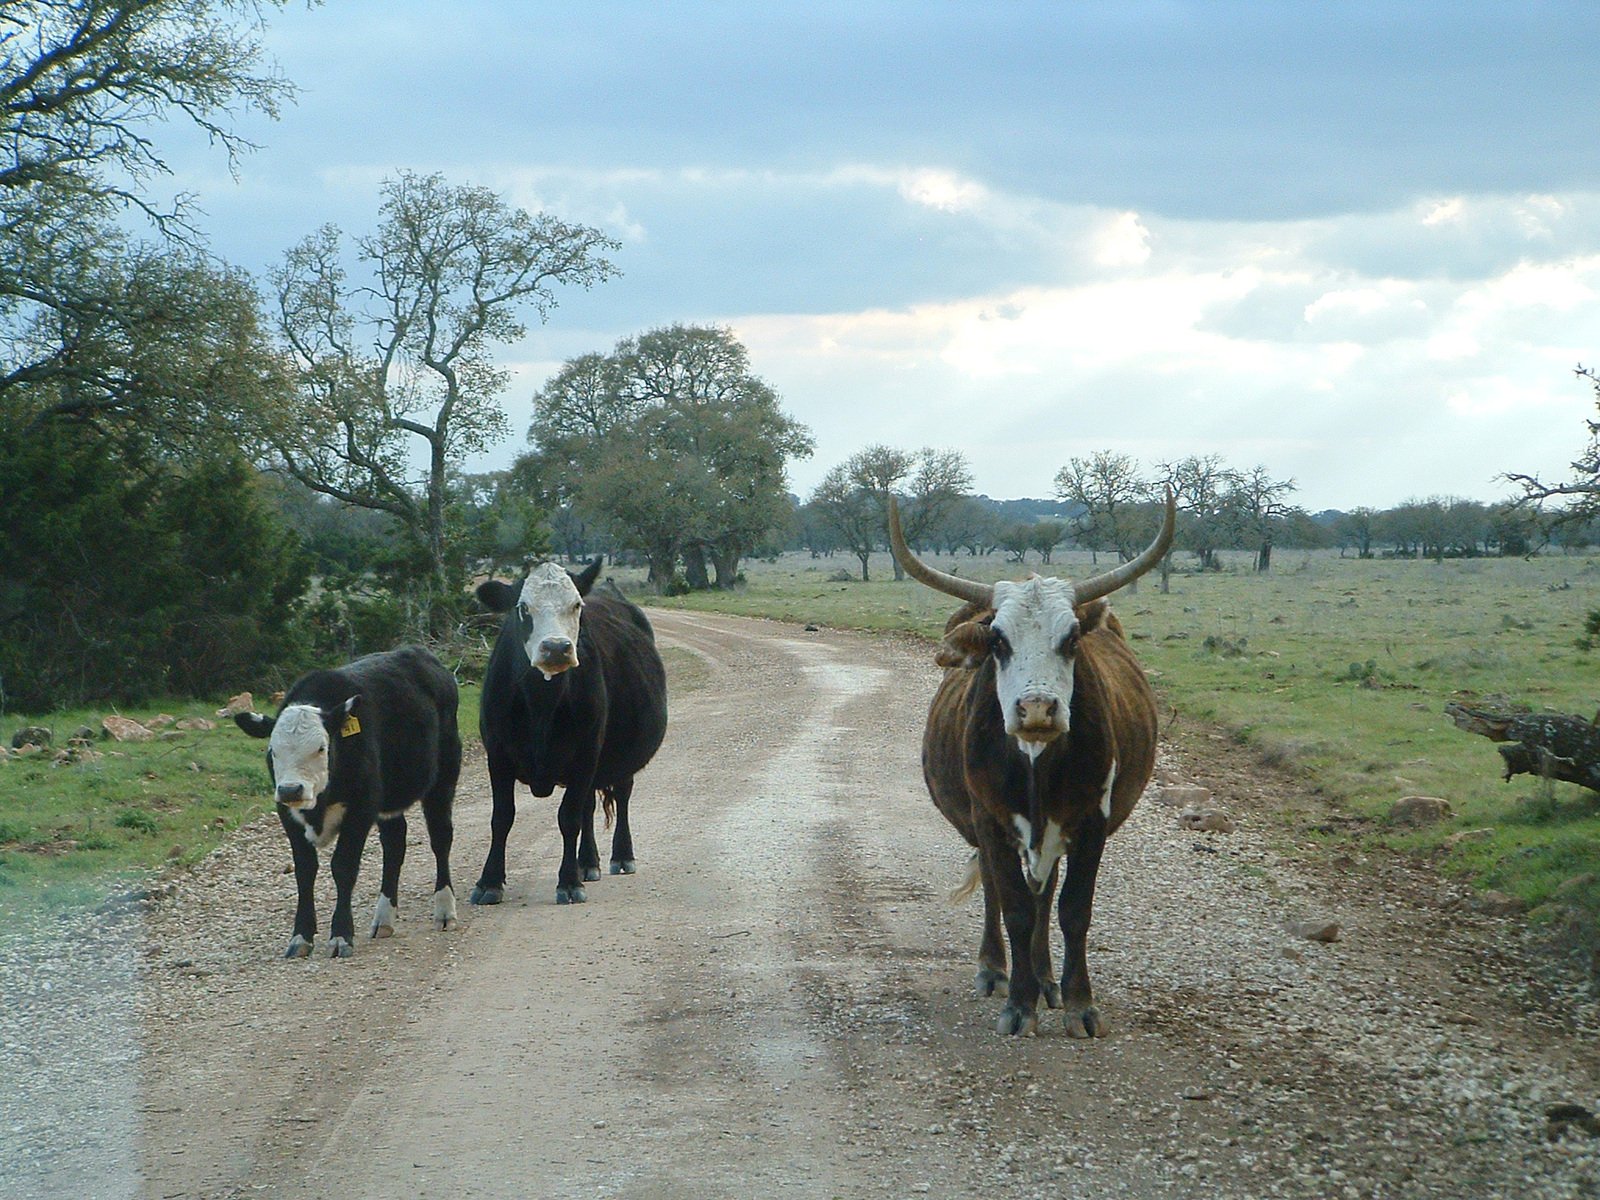 some animals walking down a dirt road in the wilderness